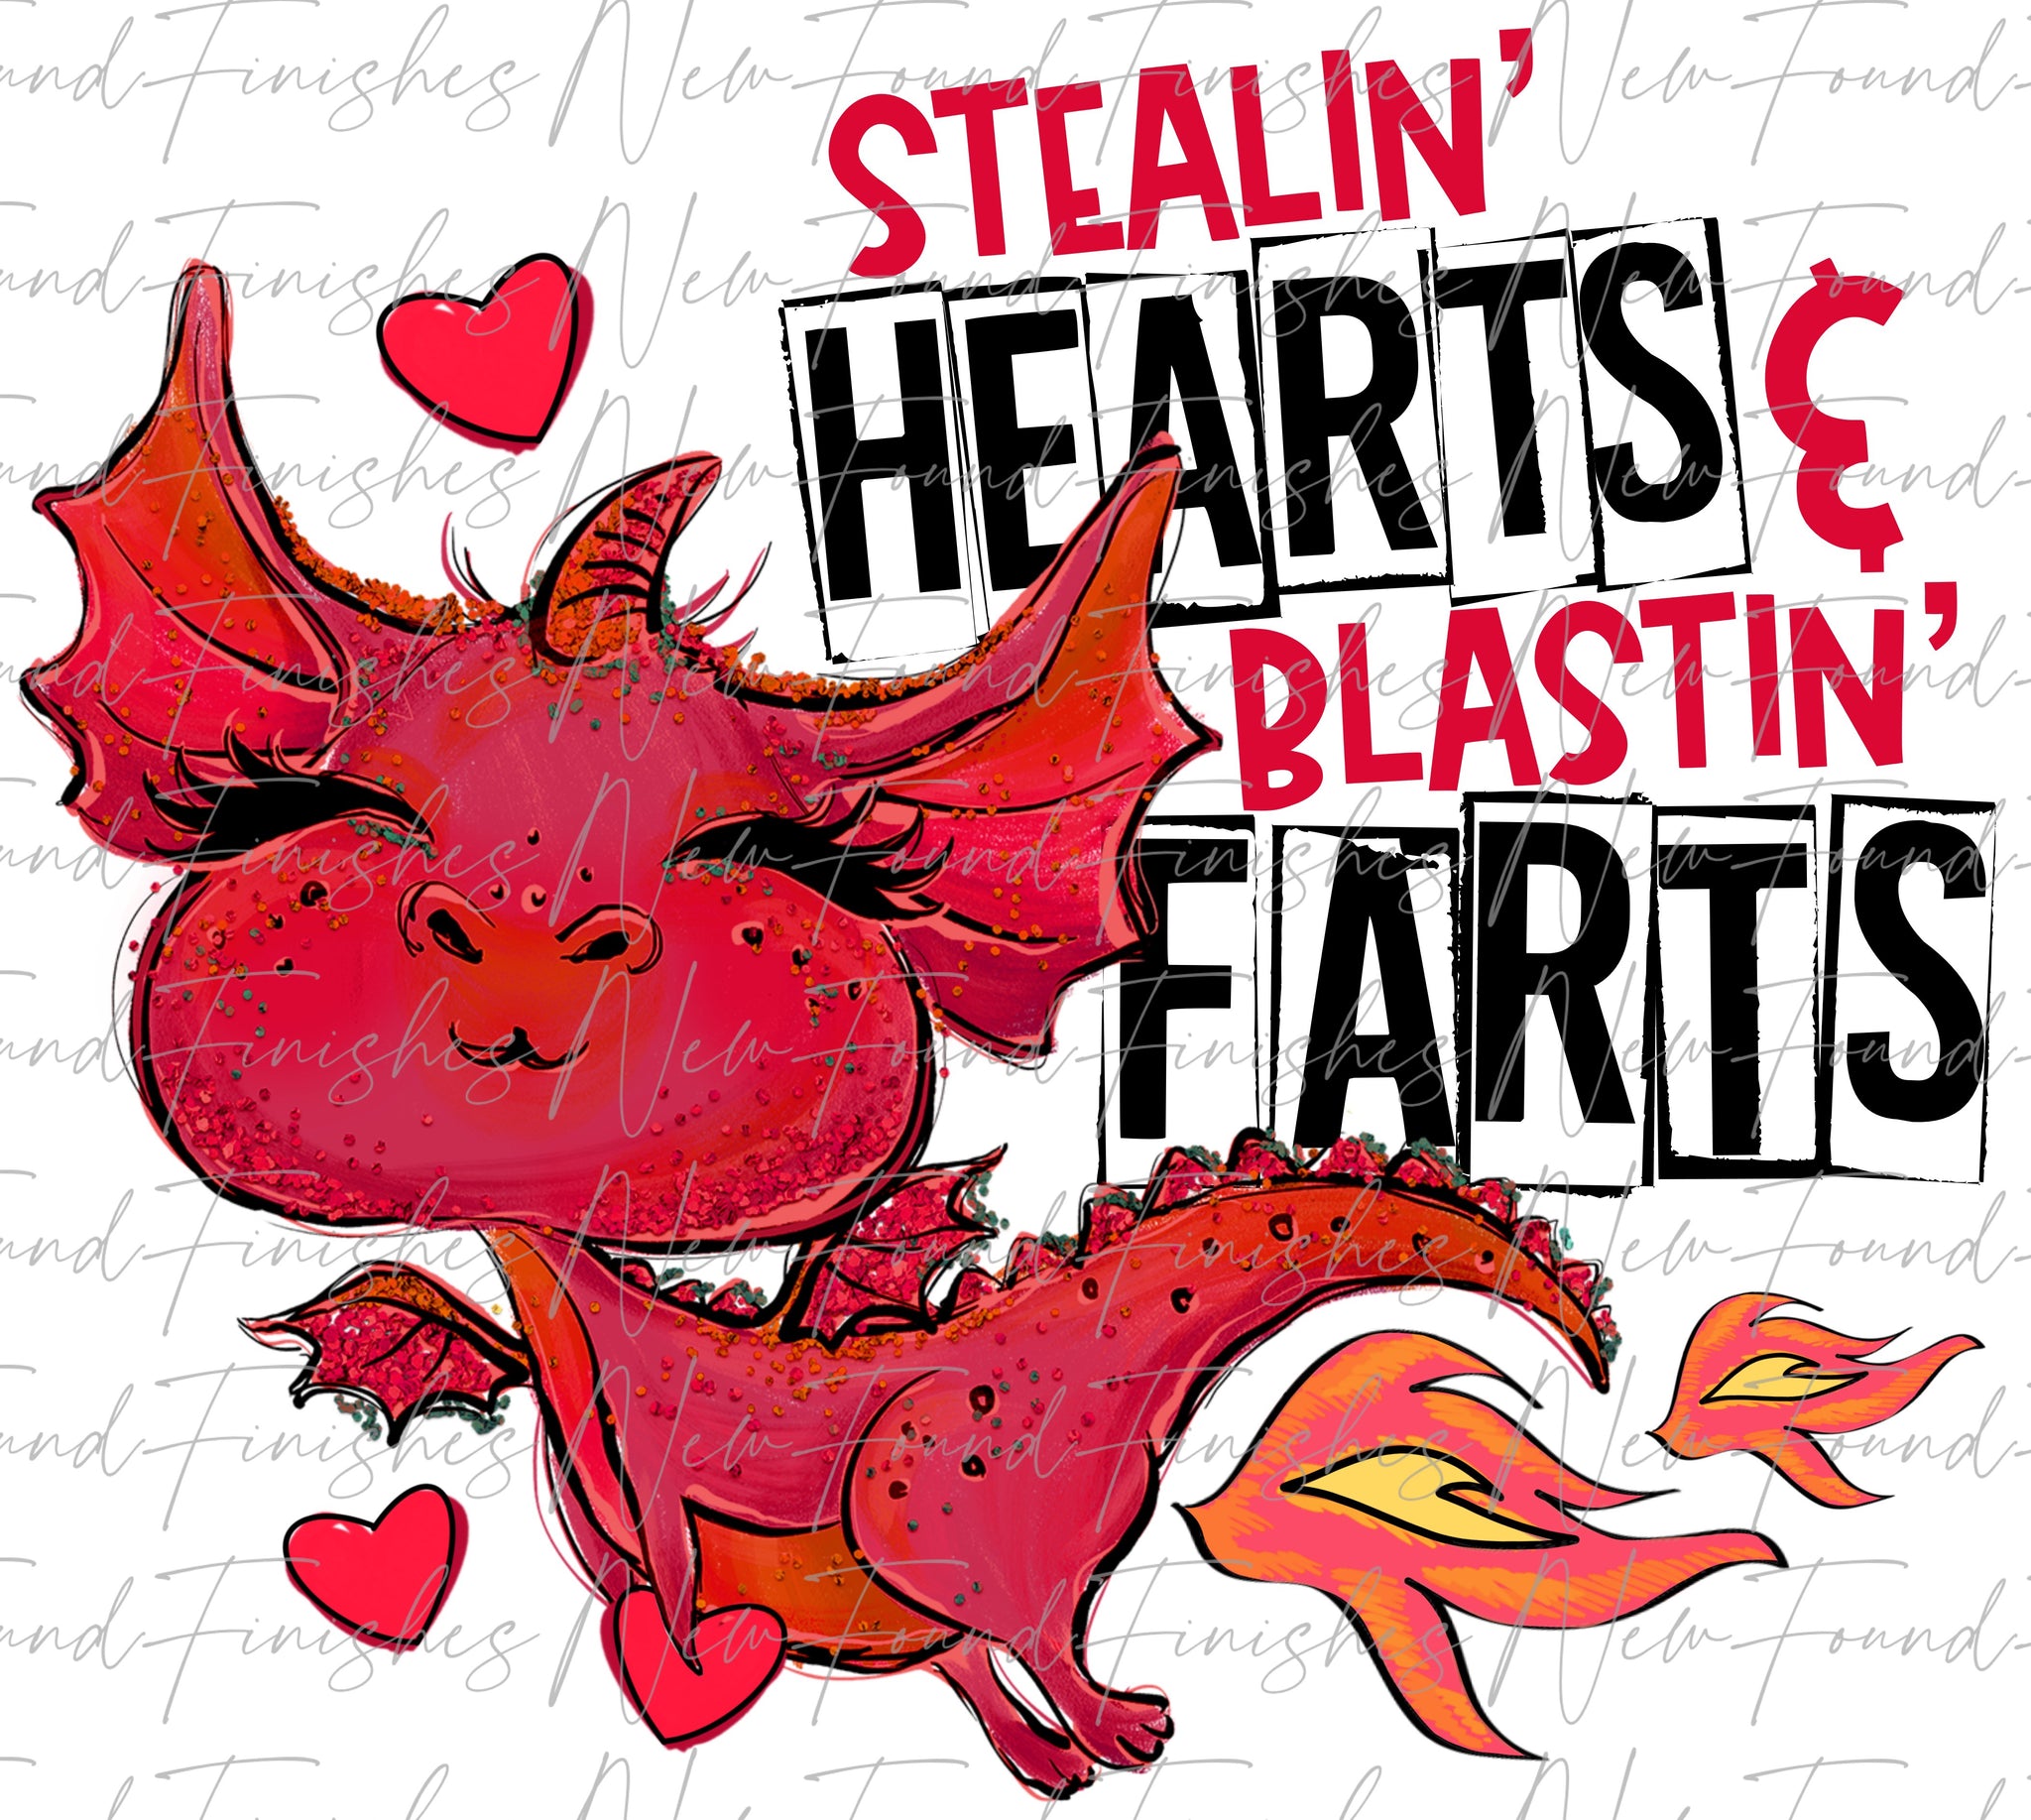 Stealing hearts and blasting farts